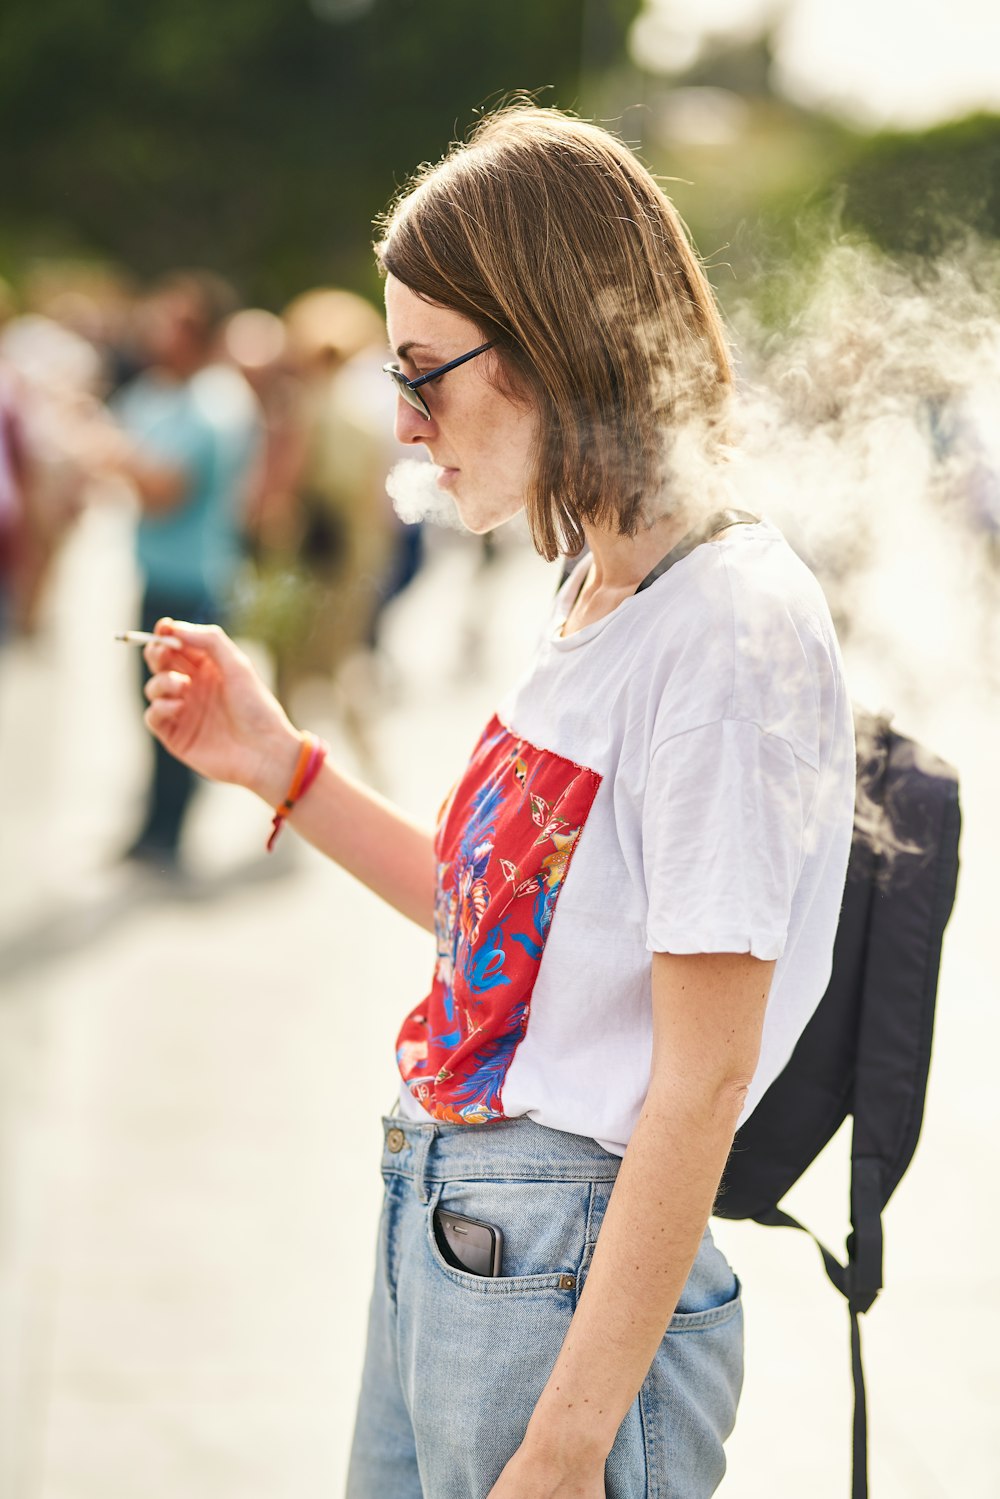 woman in white t-shirt and blue denim jeans holding smartphone